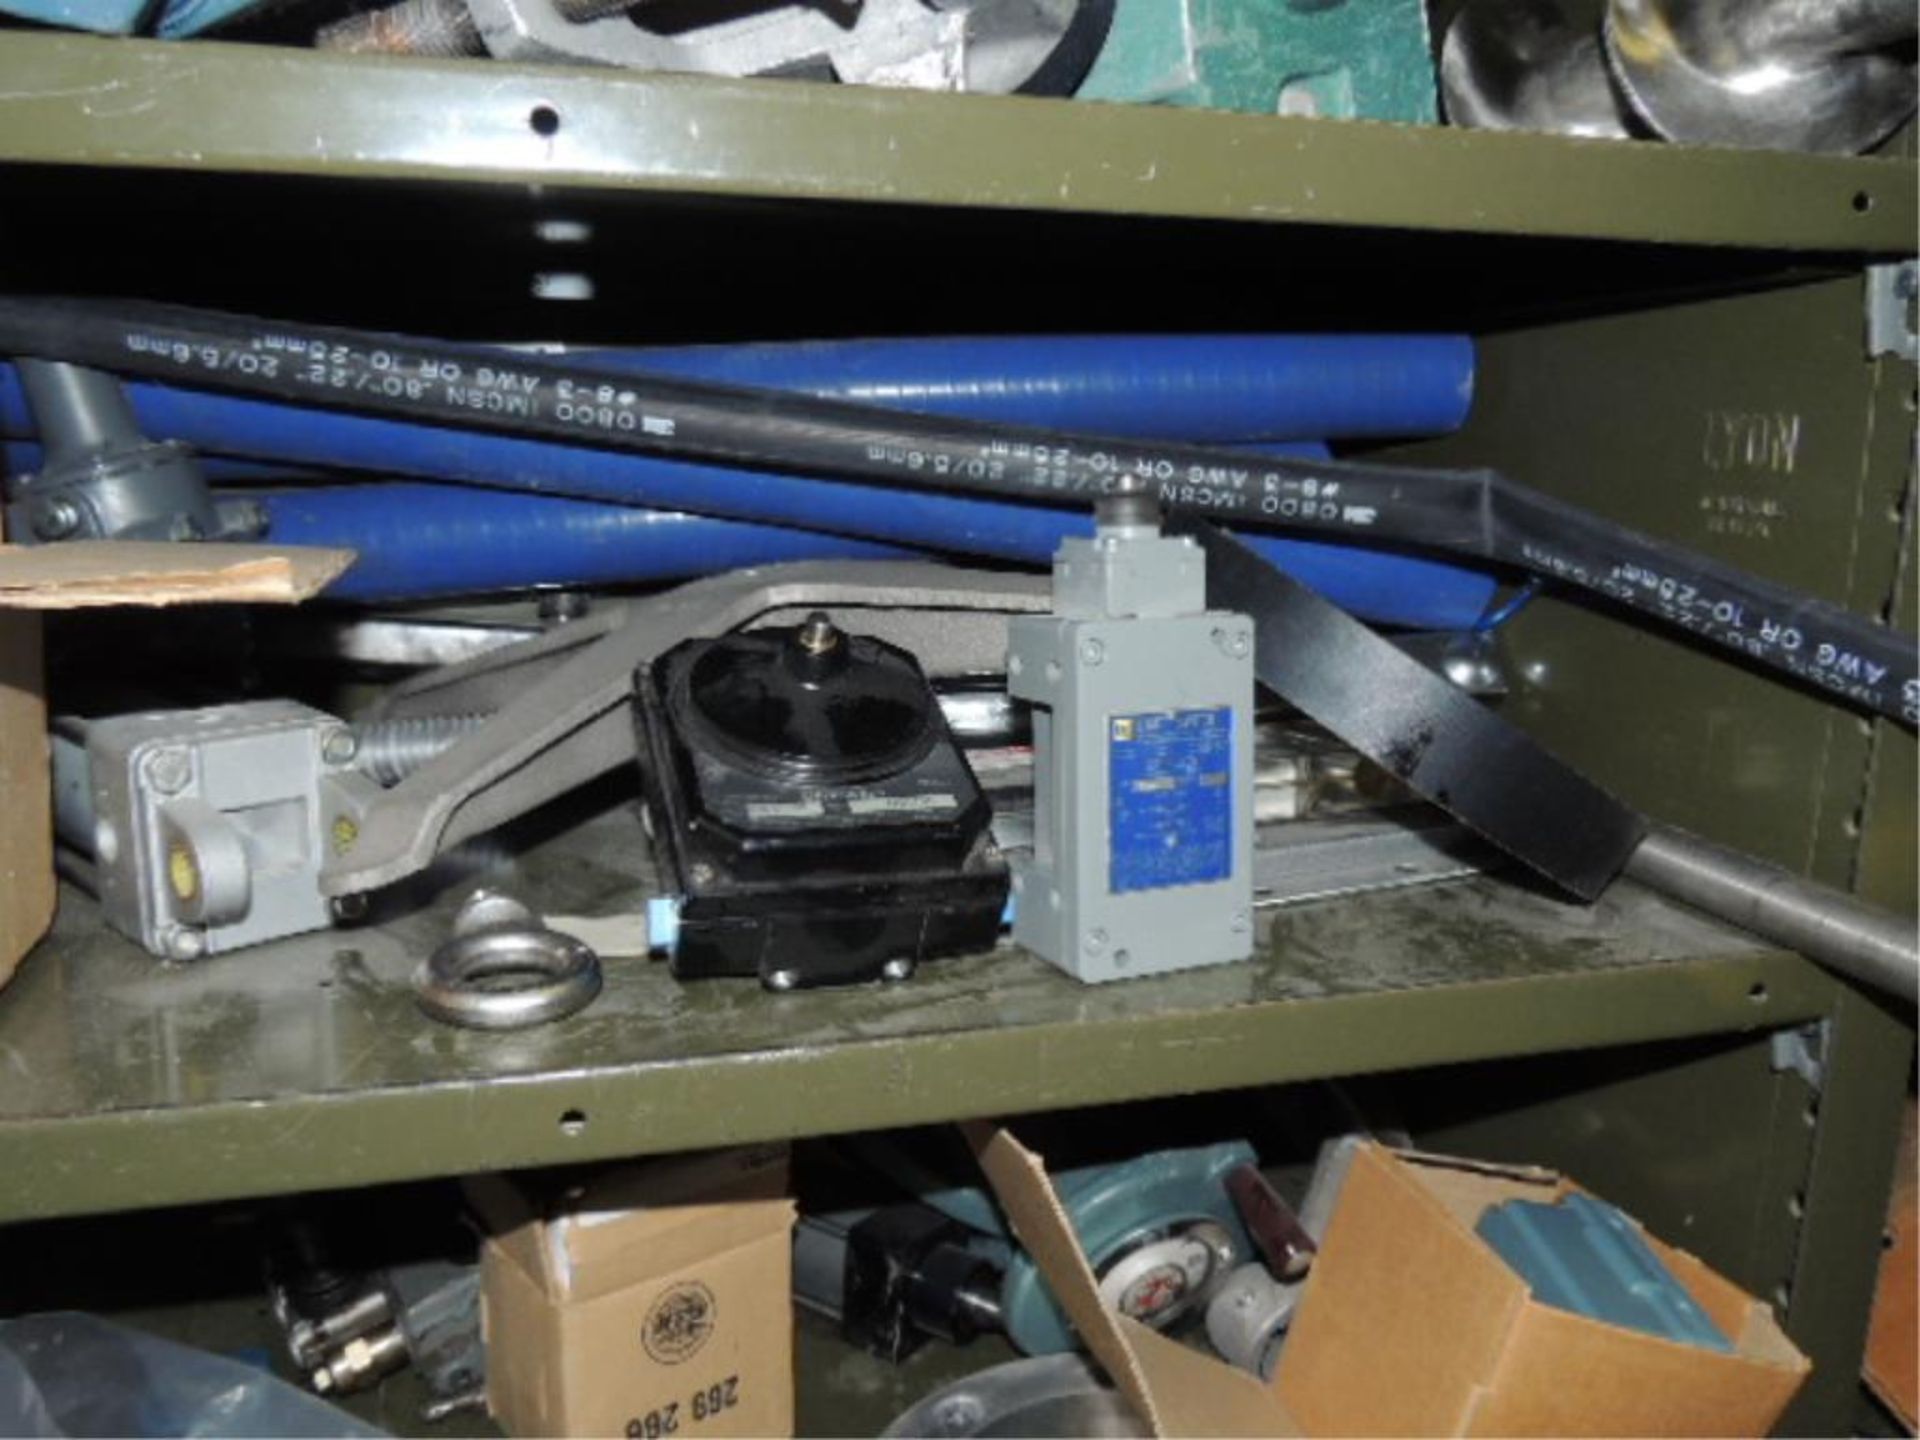 Powerflo Pumps/parts; Lot: 2 door storage cabinet and shelving contents included, rebuilt pumps - Image 19 of 29